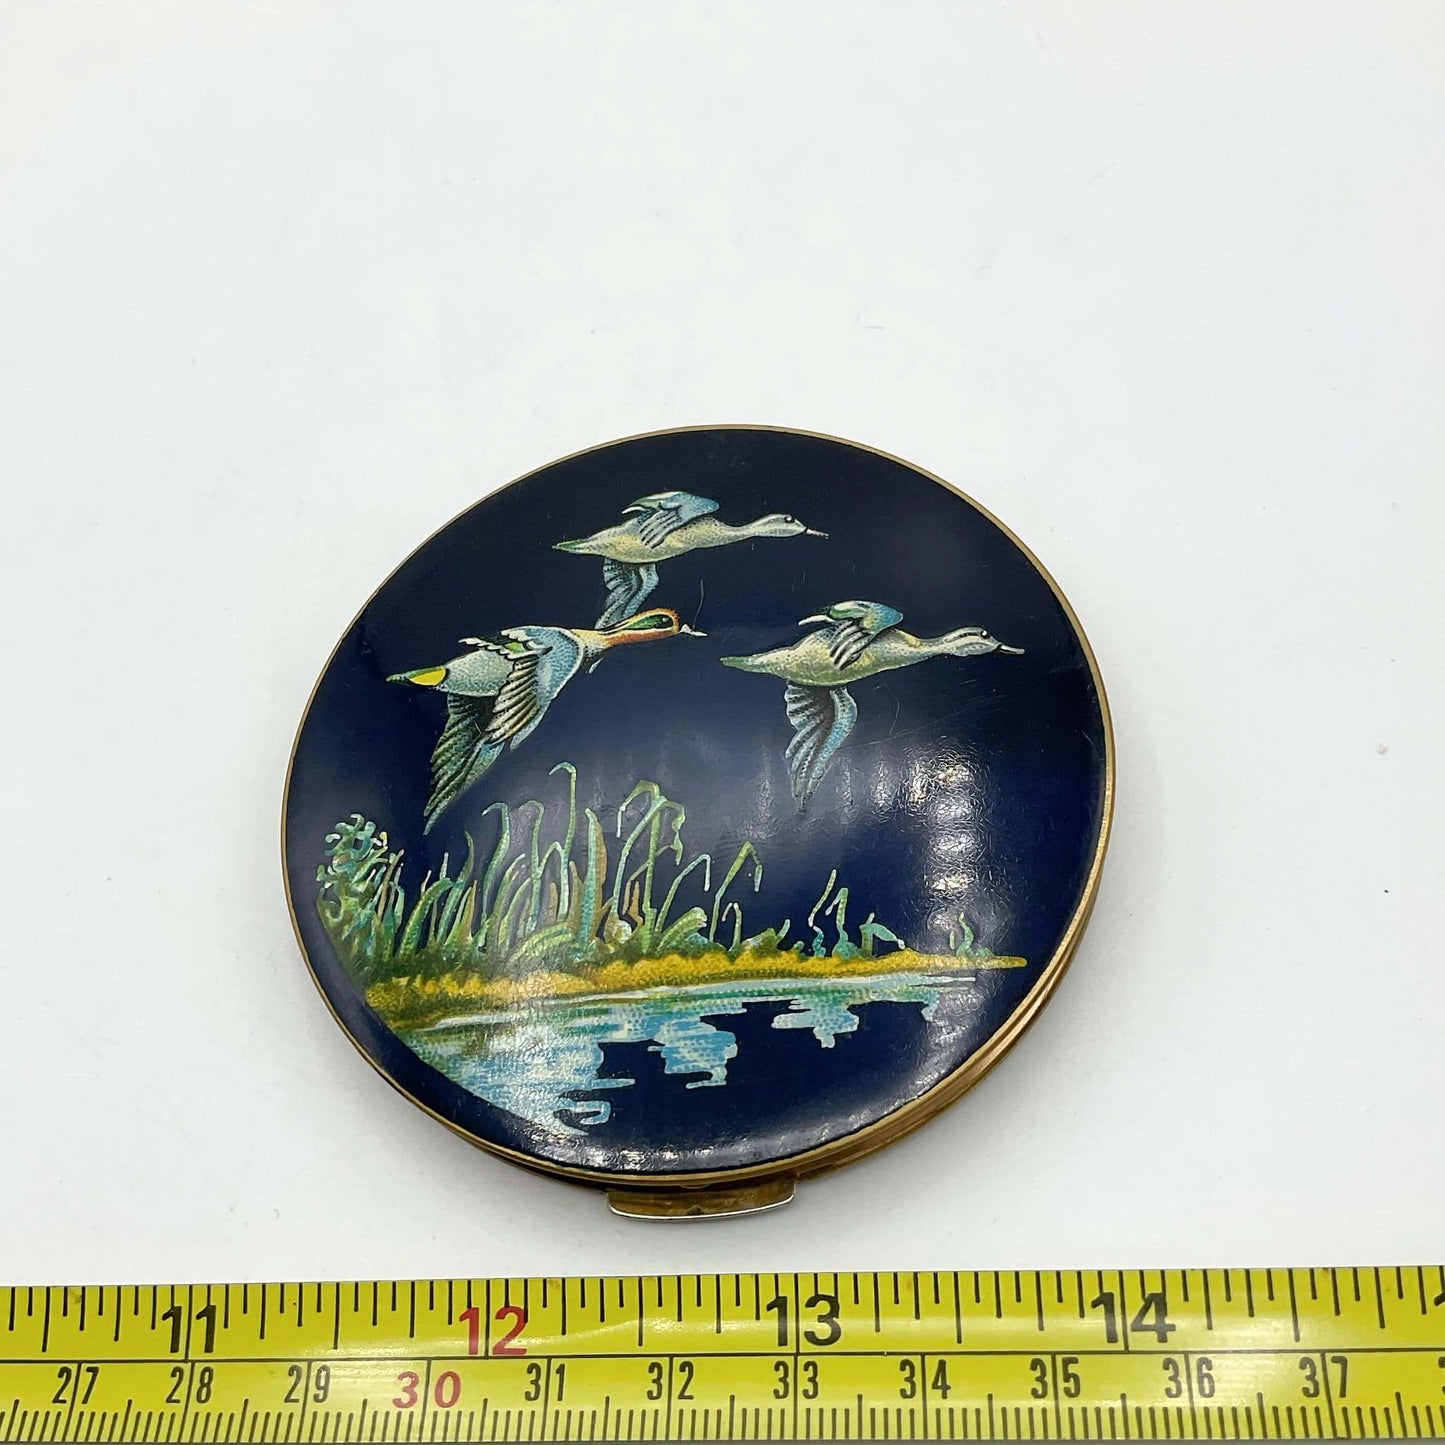 beautiful enamel featuring three ducks flying over water on a mirror compact lid next to a tape measure